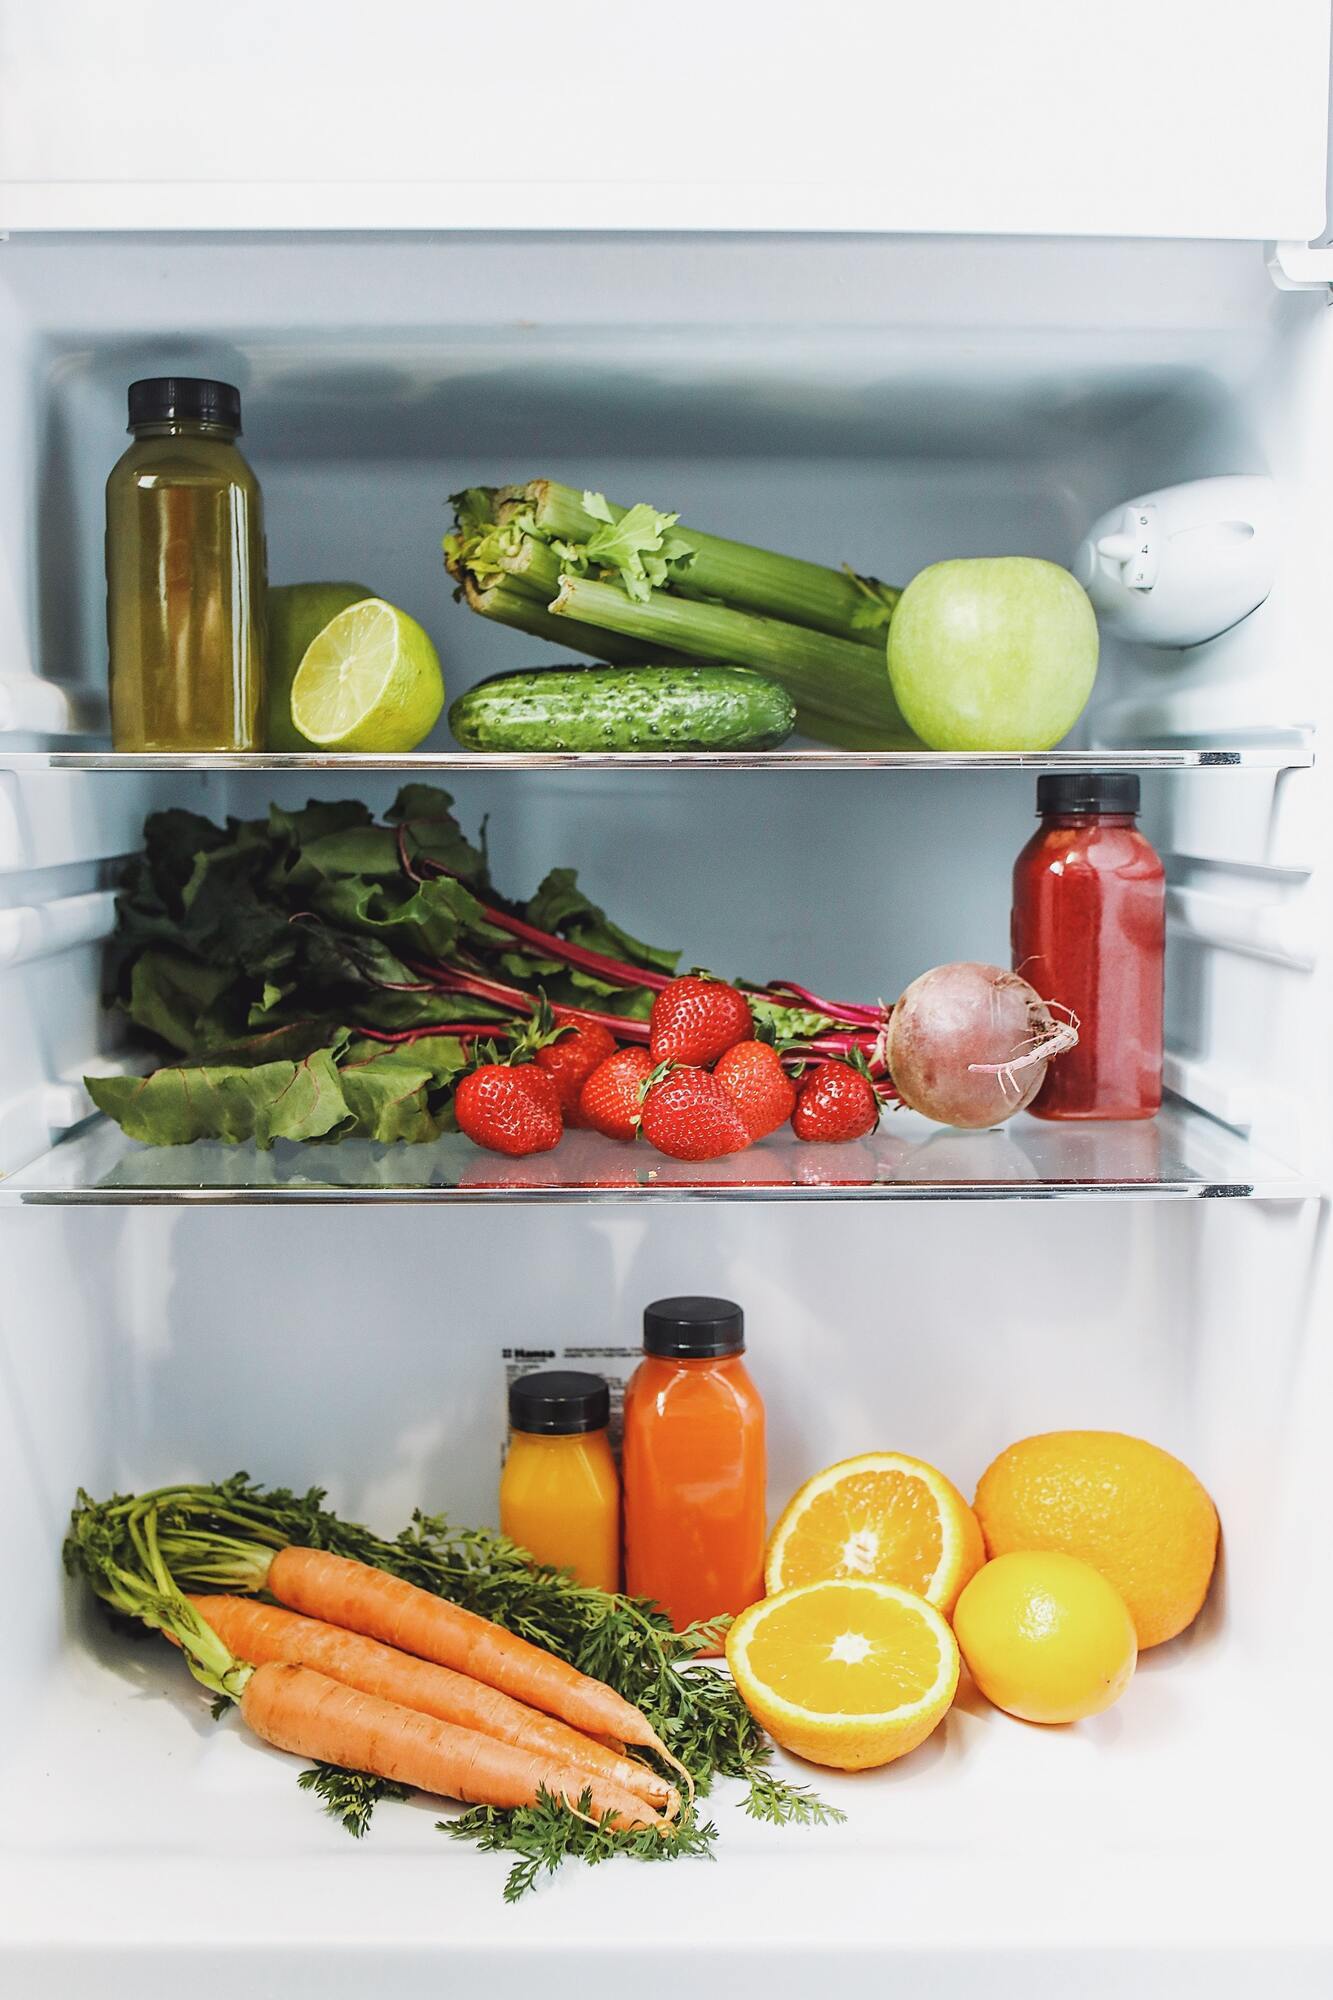 What foods should not be stored together in the refrigerator: they will be spoiled